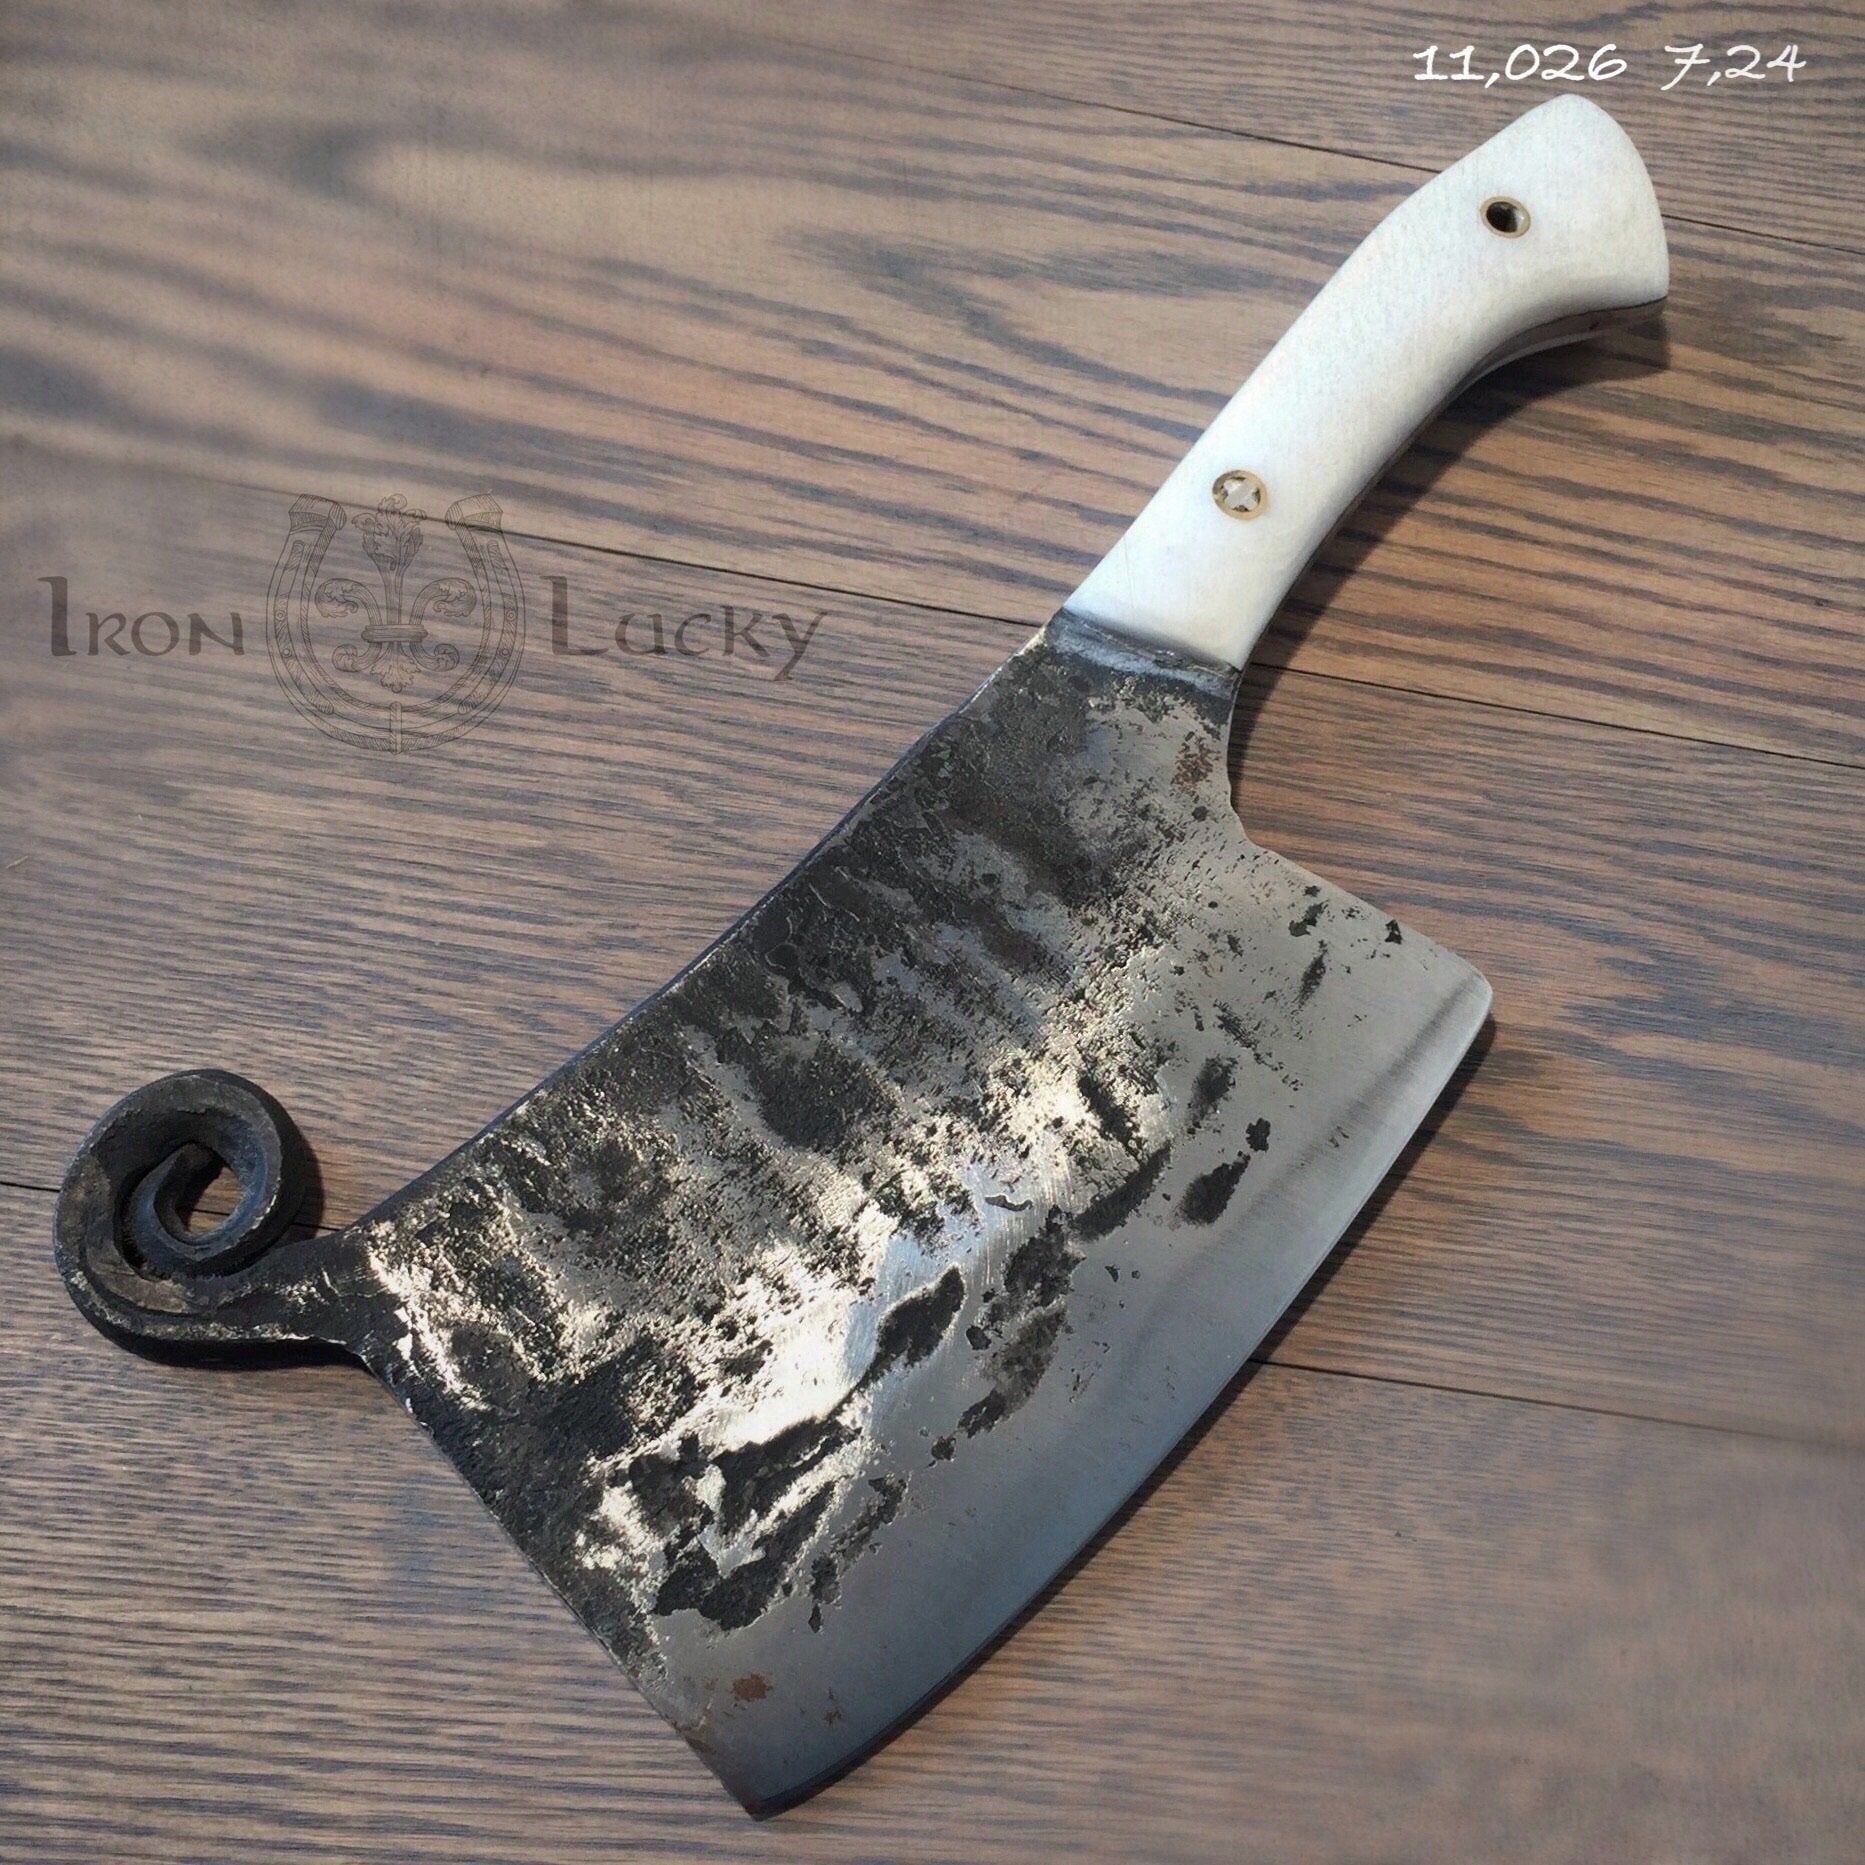 Buy HATCHET Hand Forged, Kitchen Chopping Axe, Meat Cleaver.